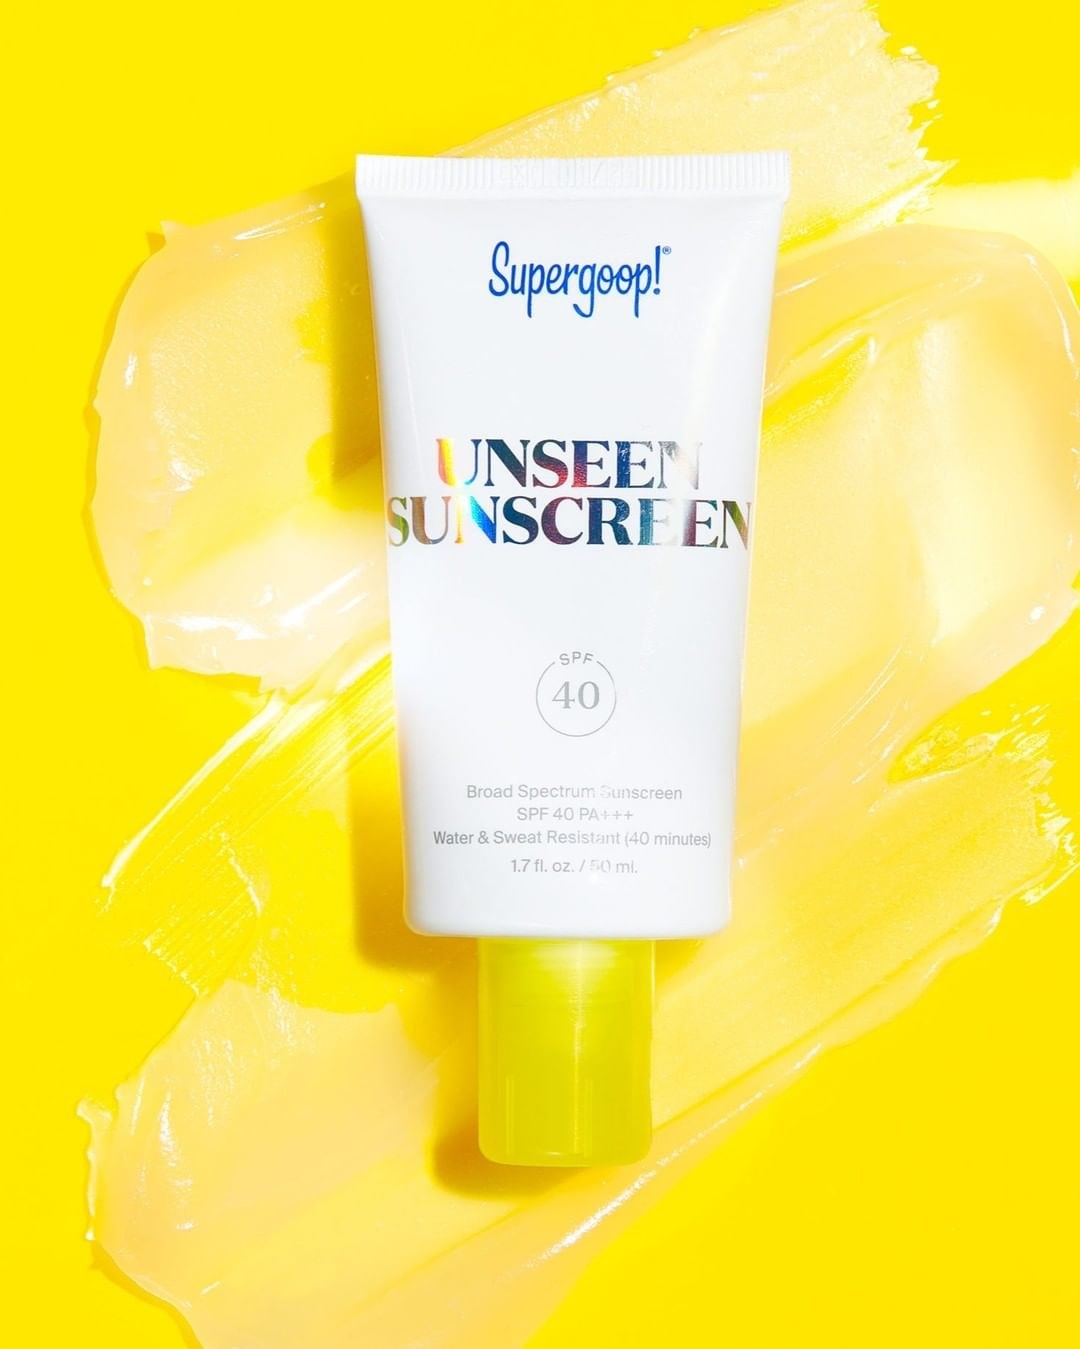 A tube of Supergoop! gel sunscreen with SPF 40 protection